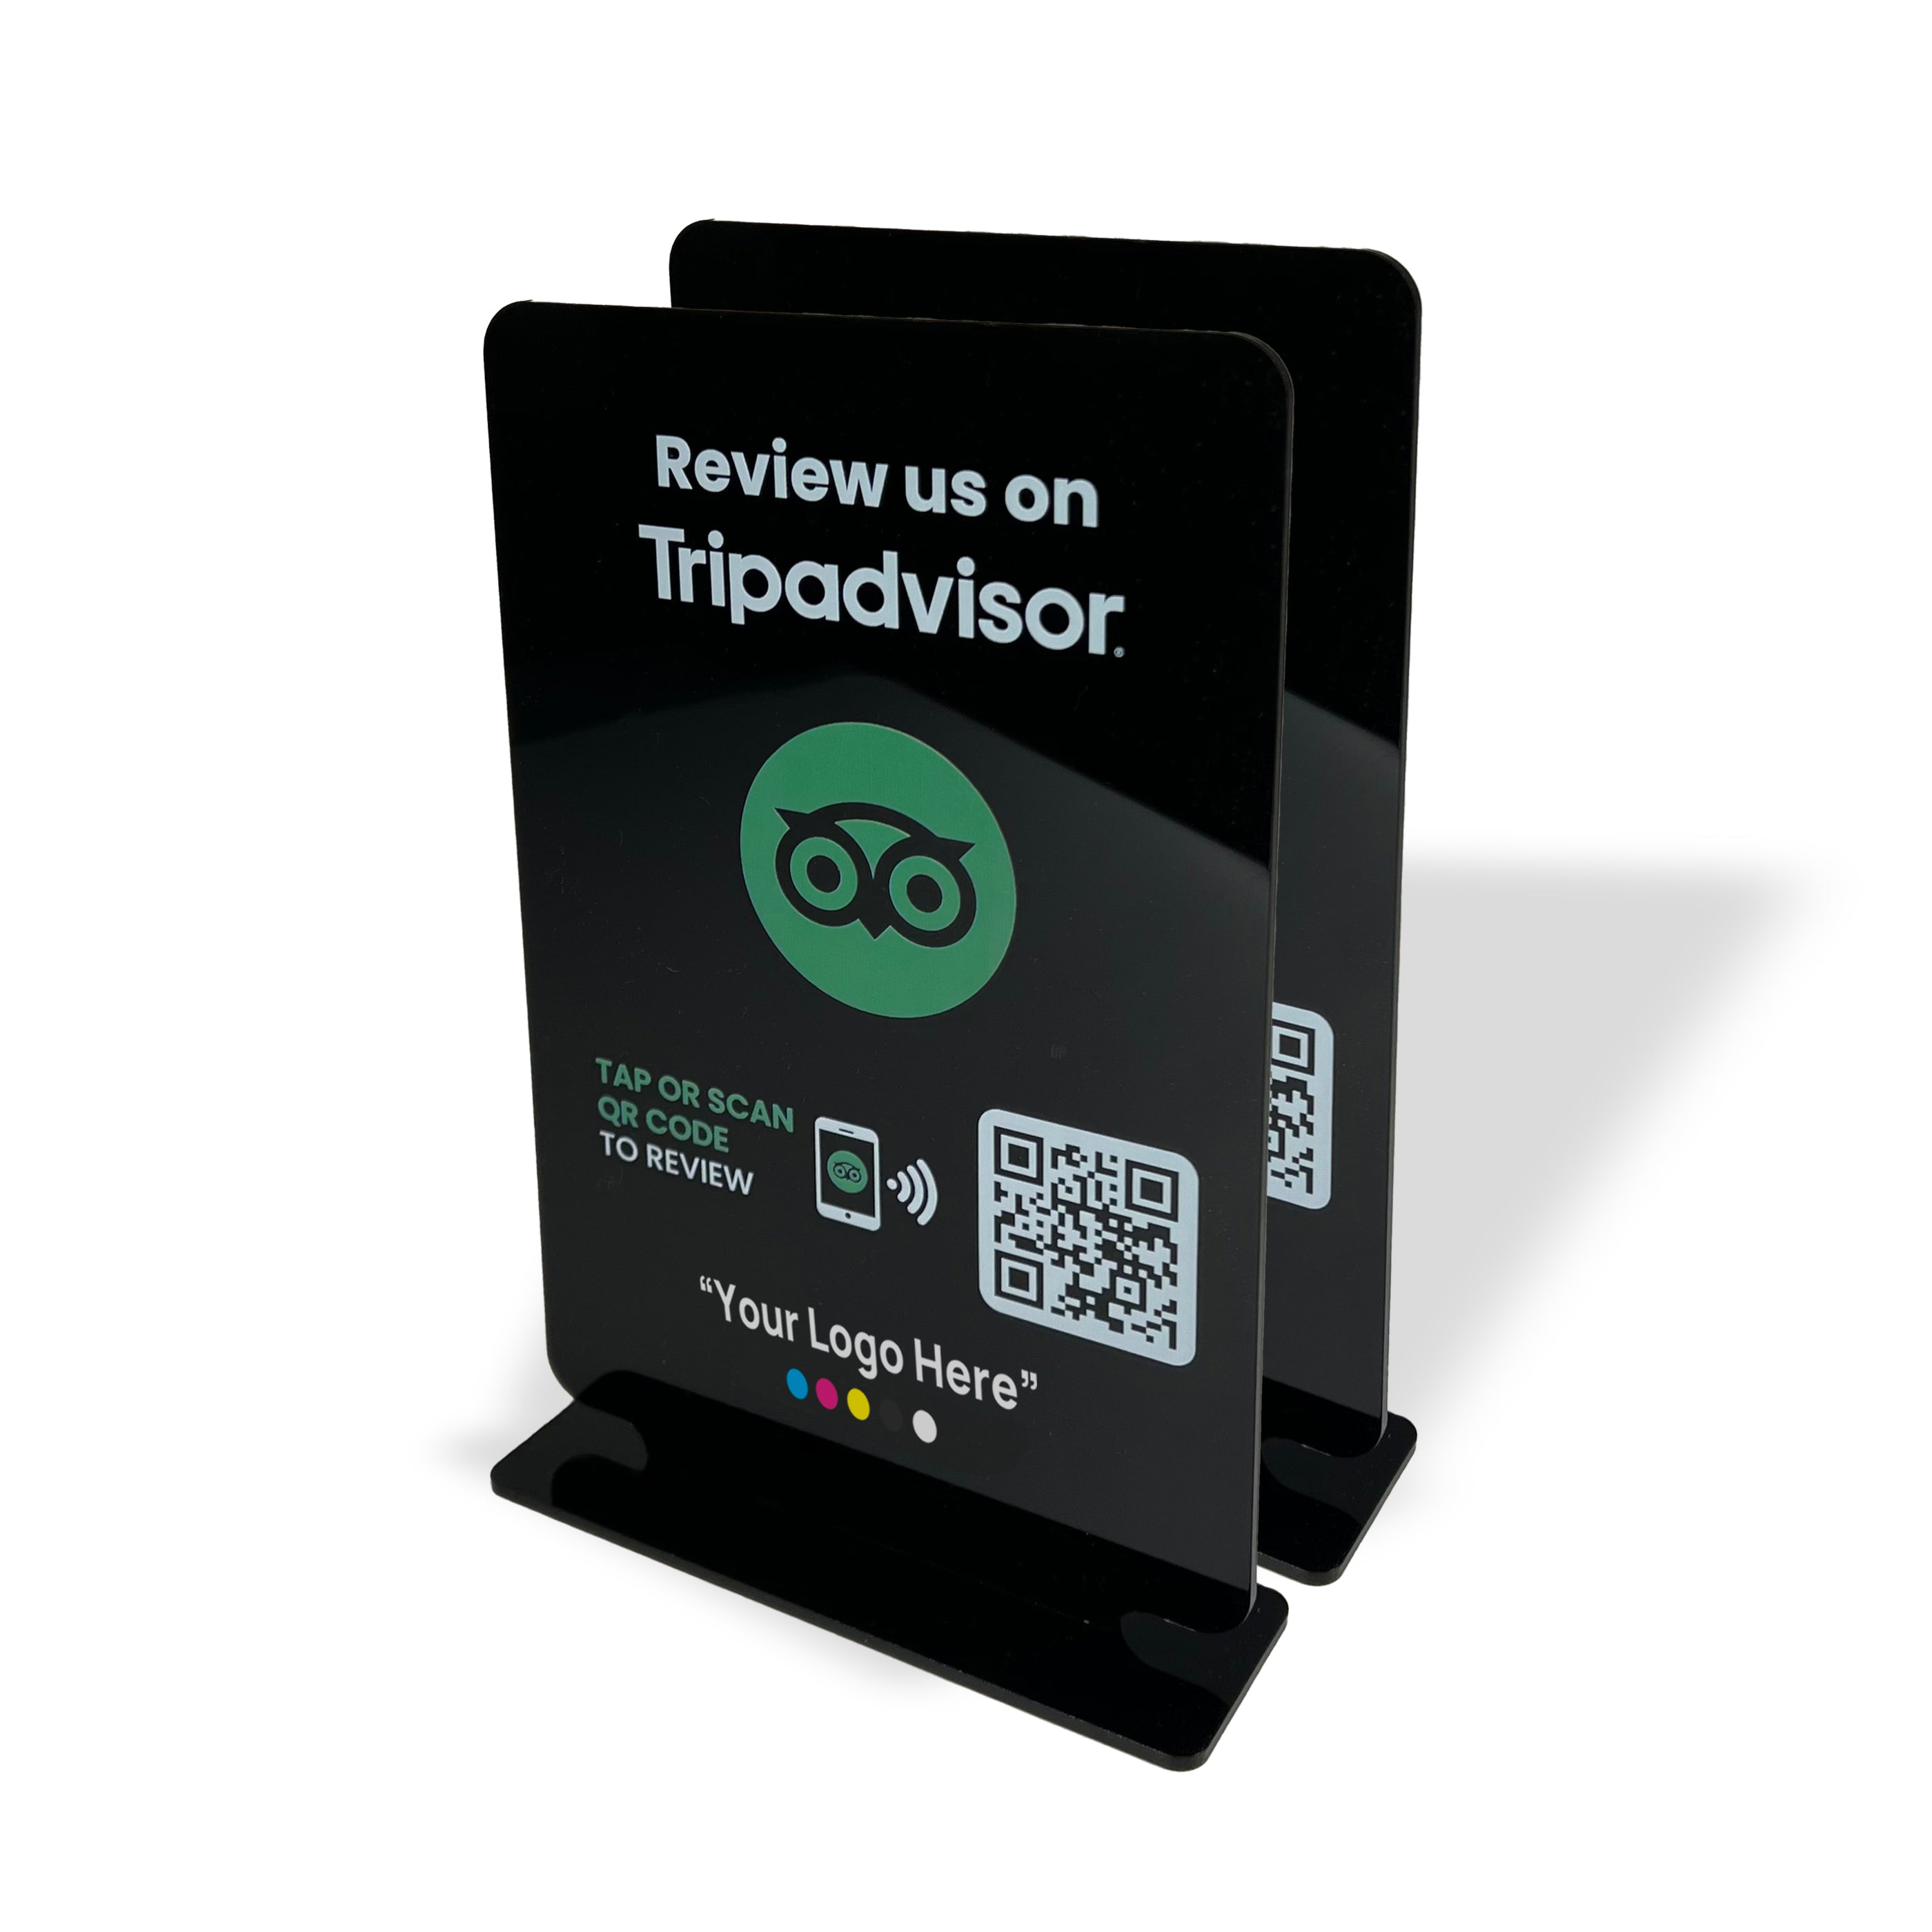 Tripadvisor Review Table Talker T-Shape with your logo.